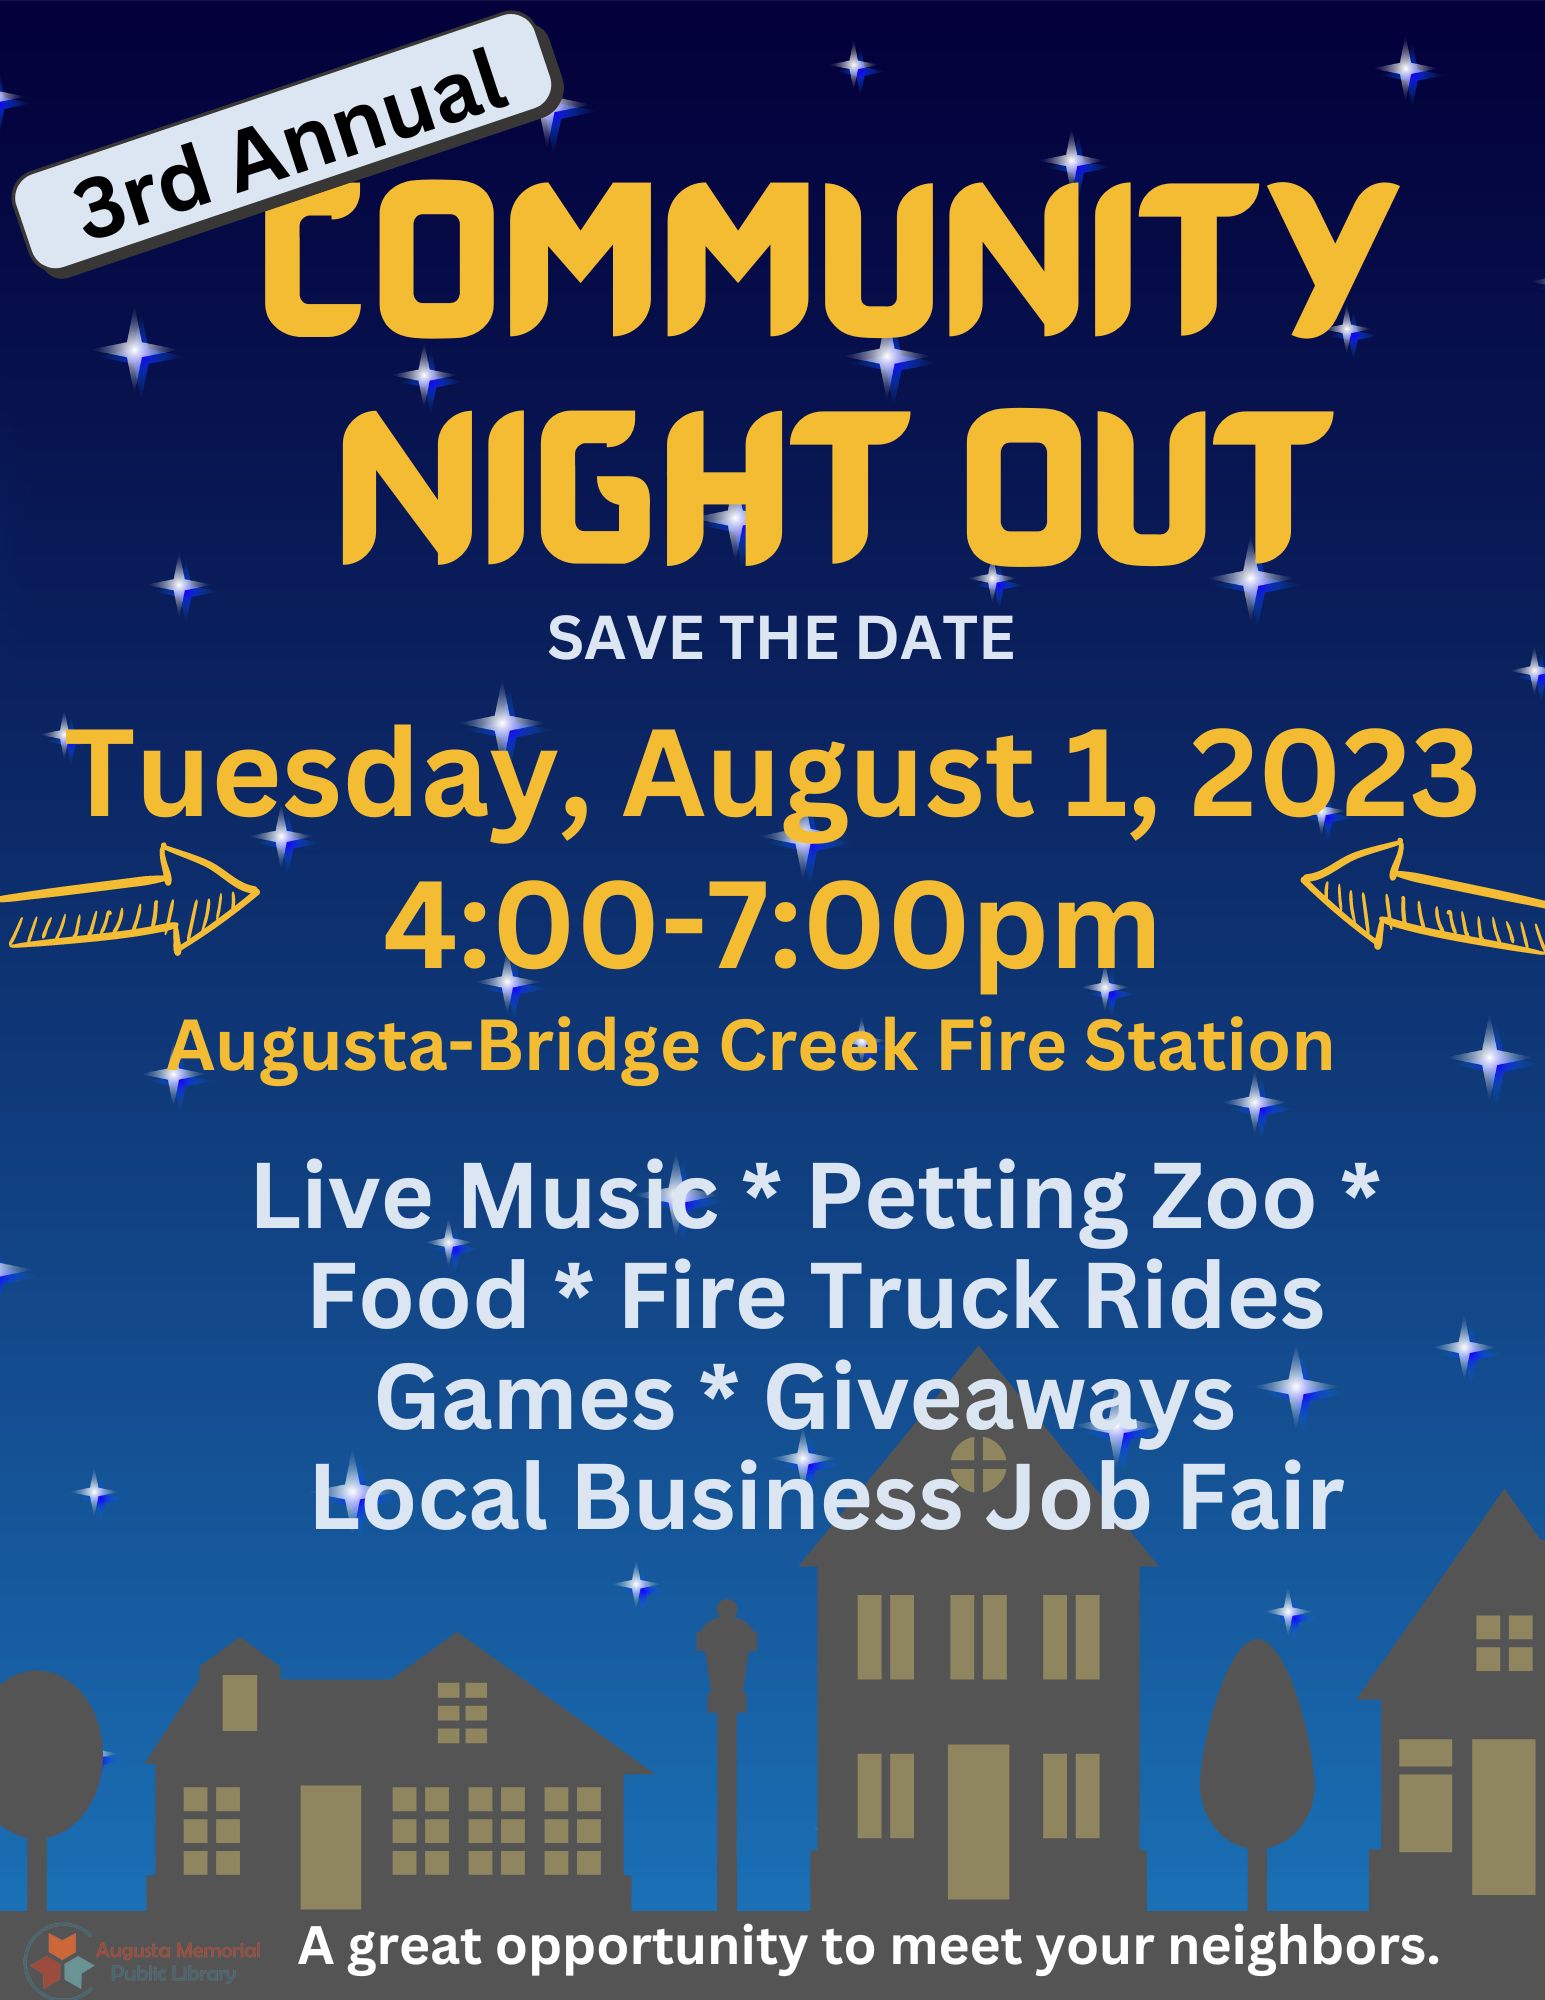 Community Night Out Tuesday, August 1 from 4:00-7:00pm at the Augusta Bridge Creek Fire Station